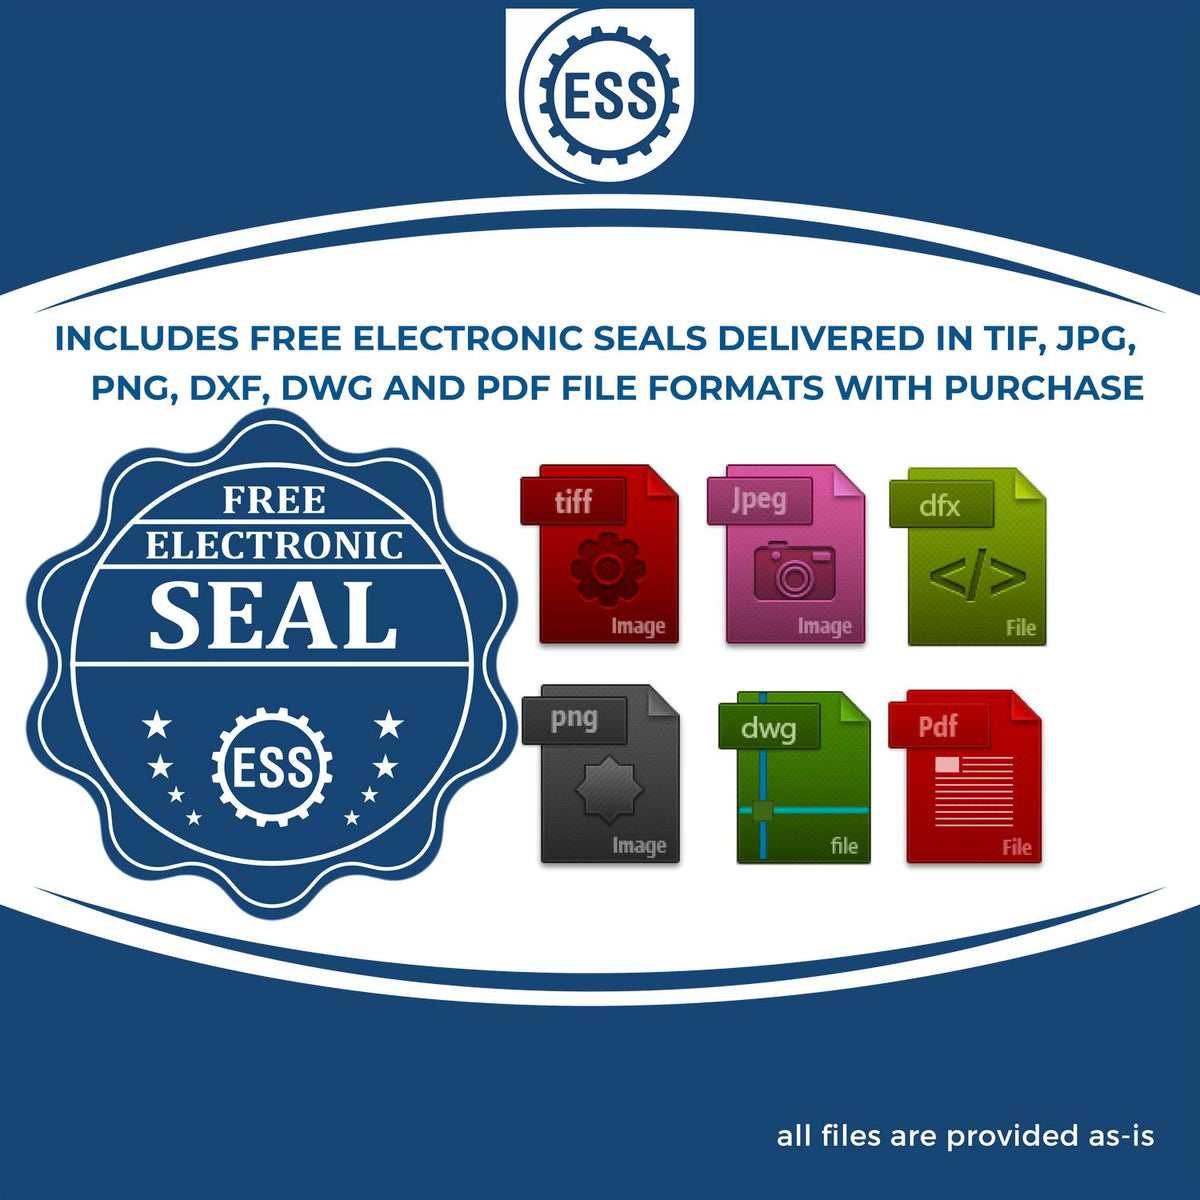 An infographic for the free electronic seal for the Slim Pre-Inked District of Columbia Architect Seal Stamp illustrating the different file type icons such as DXF, DWG, TIF, JPG and PNG.